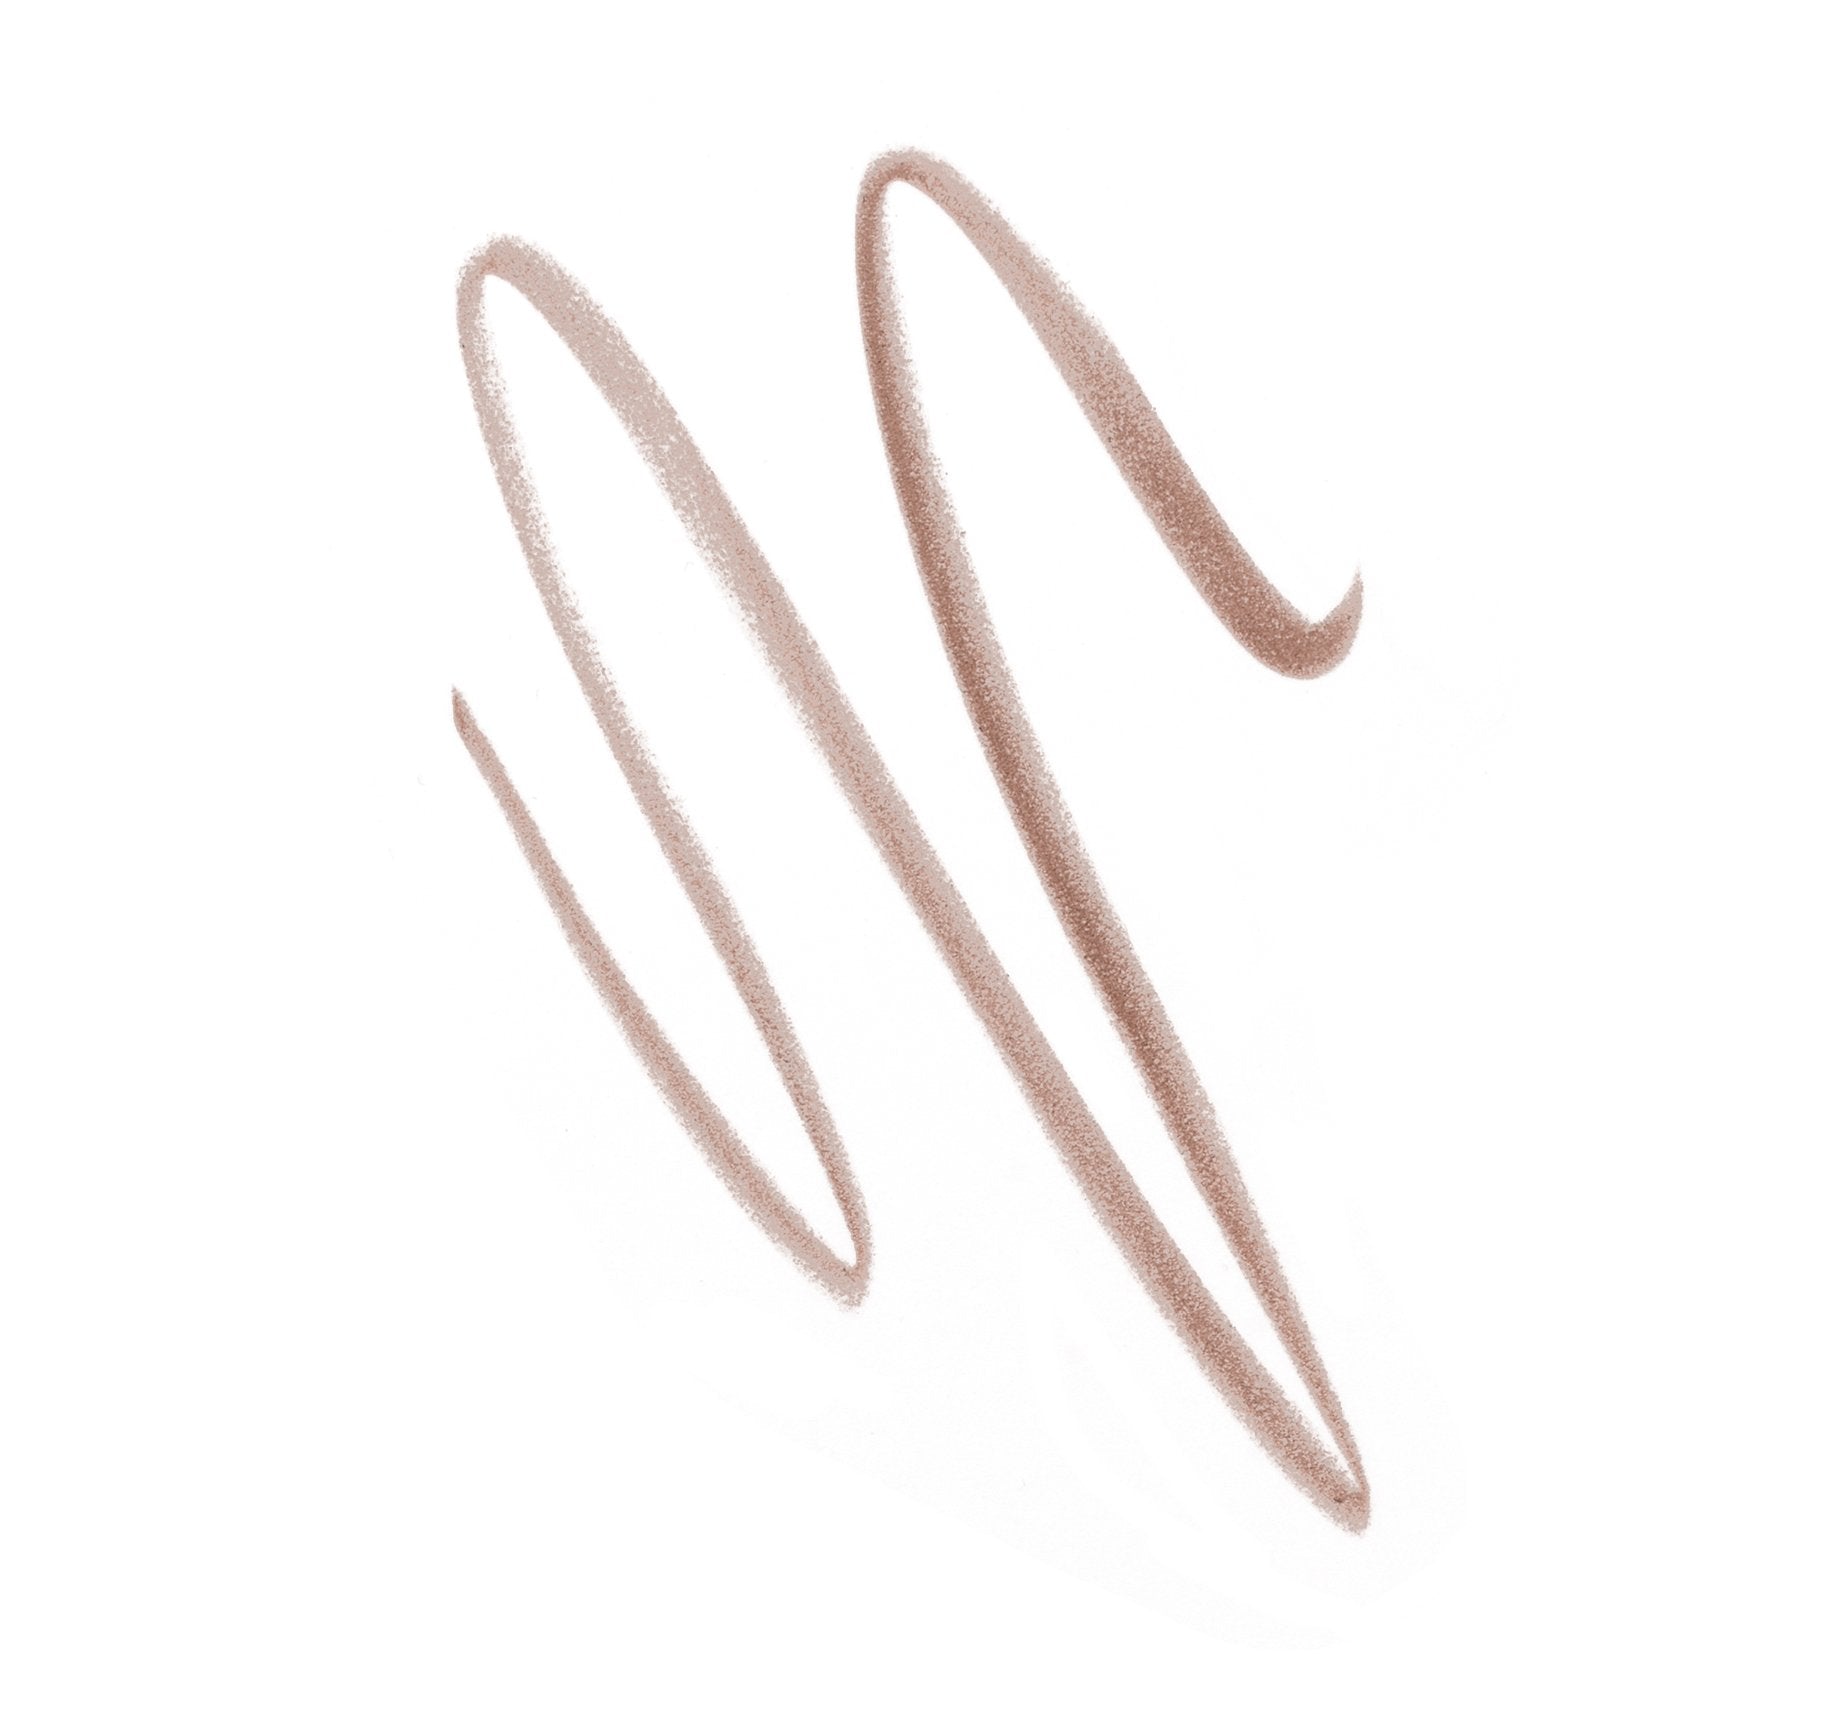 Definer Dual-Ended Brow Pencil & Spoolie - Biscotti - Image 10